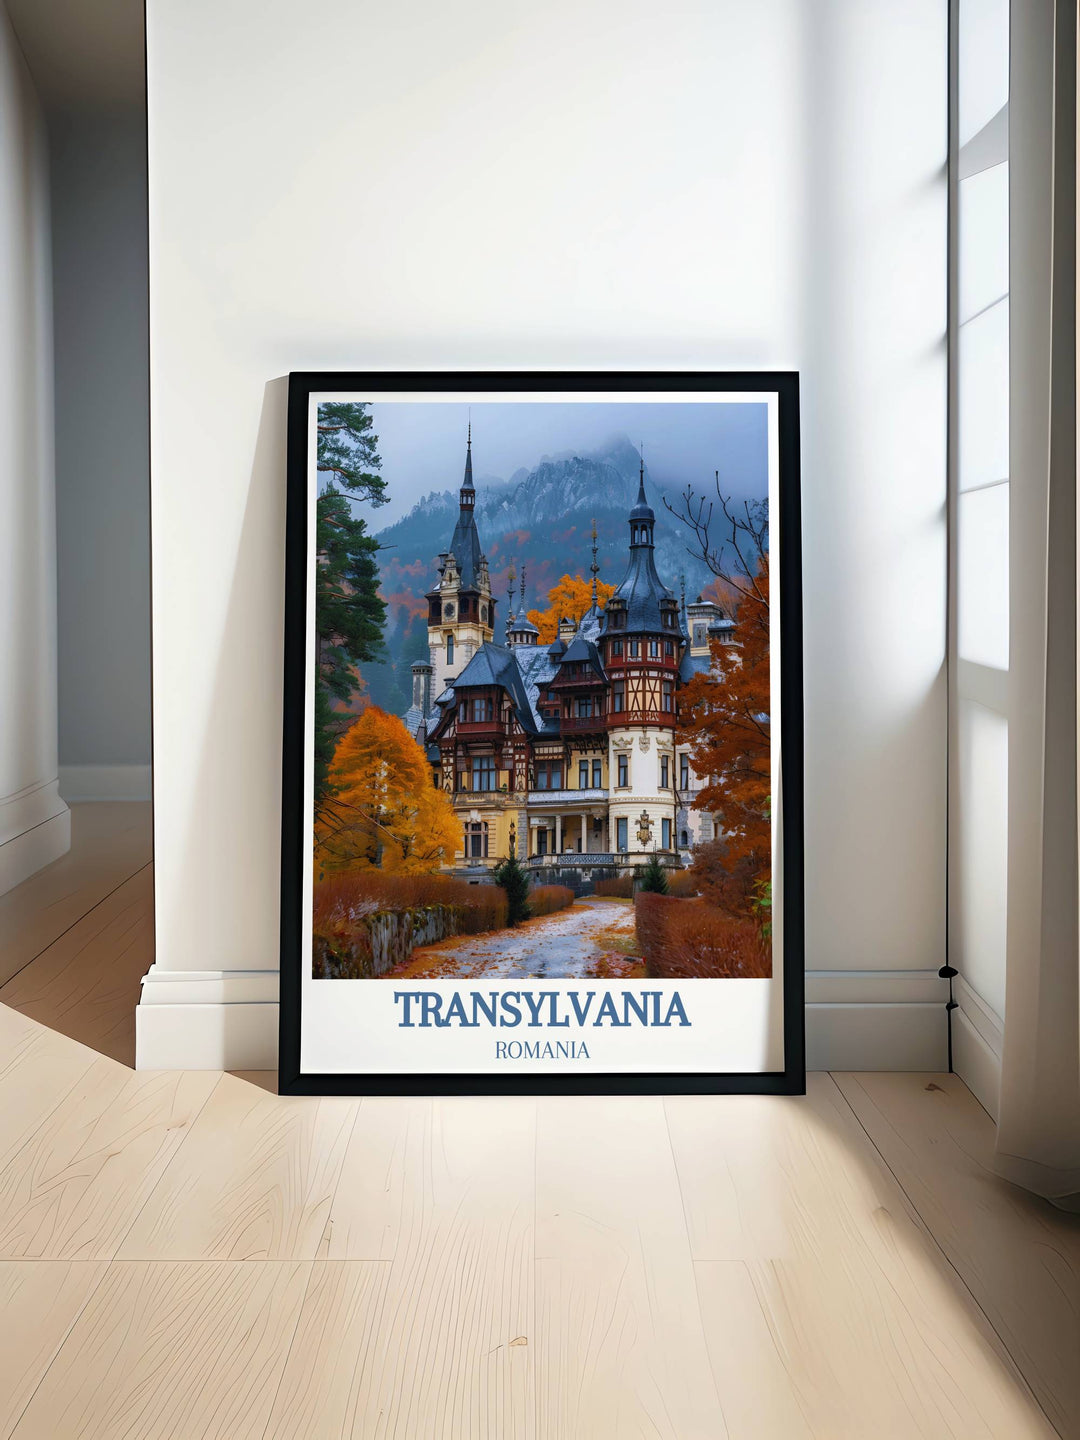 Transylvania gallery wall art featuring Peleș Castle, capturing the castles intricate details and vibrant colors, perfect for adding a touch of Romanian history and architectural splendor to any gallery wall.